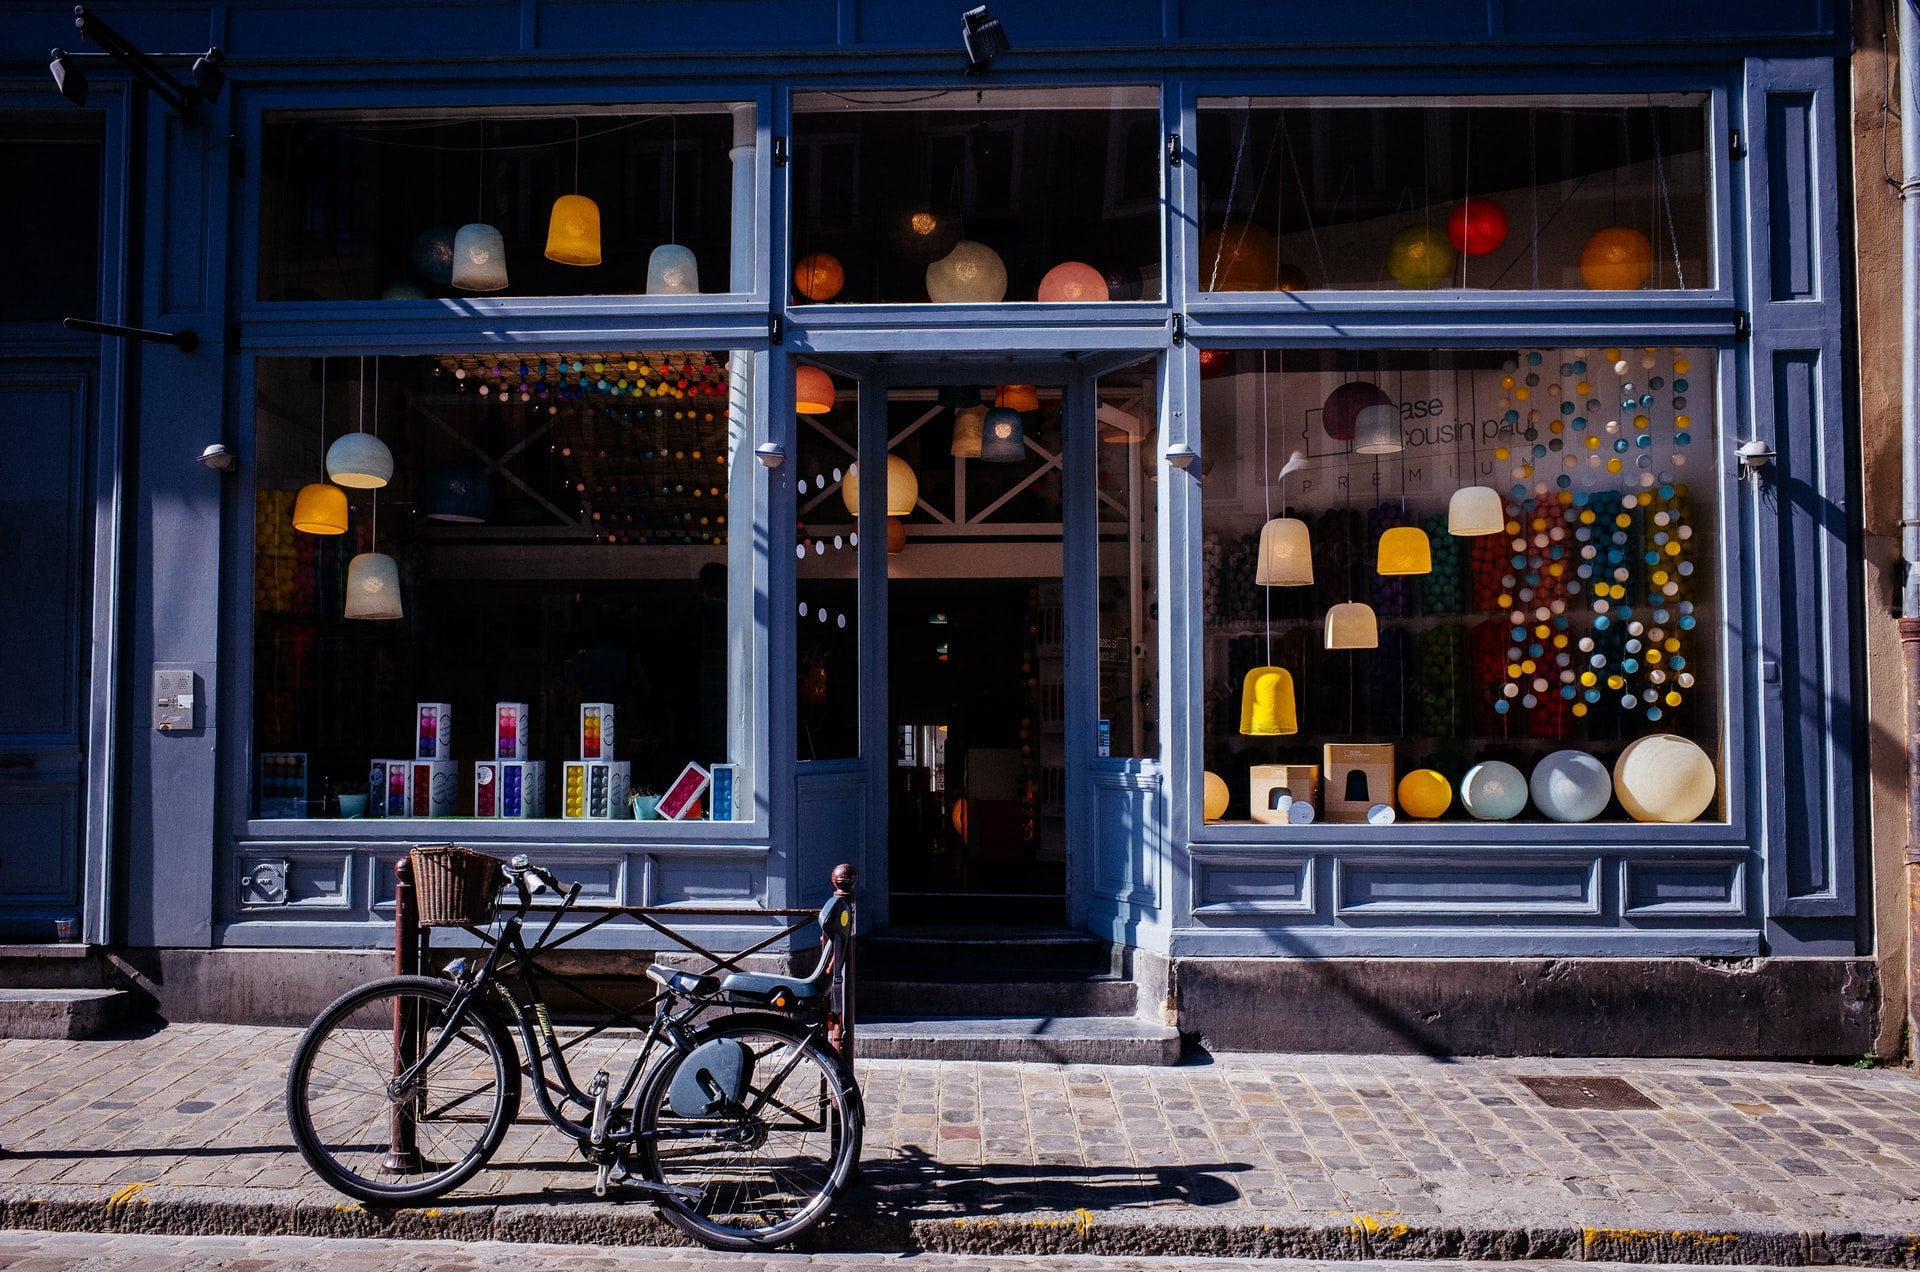 6 ways you can support small businesses this holiday season and beyond